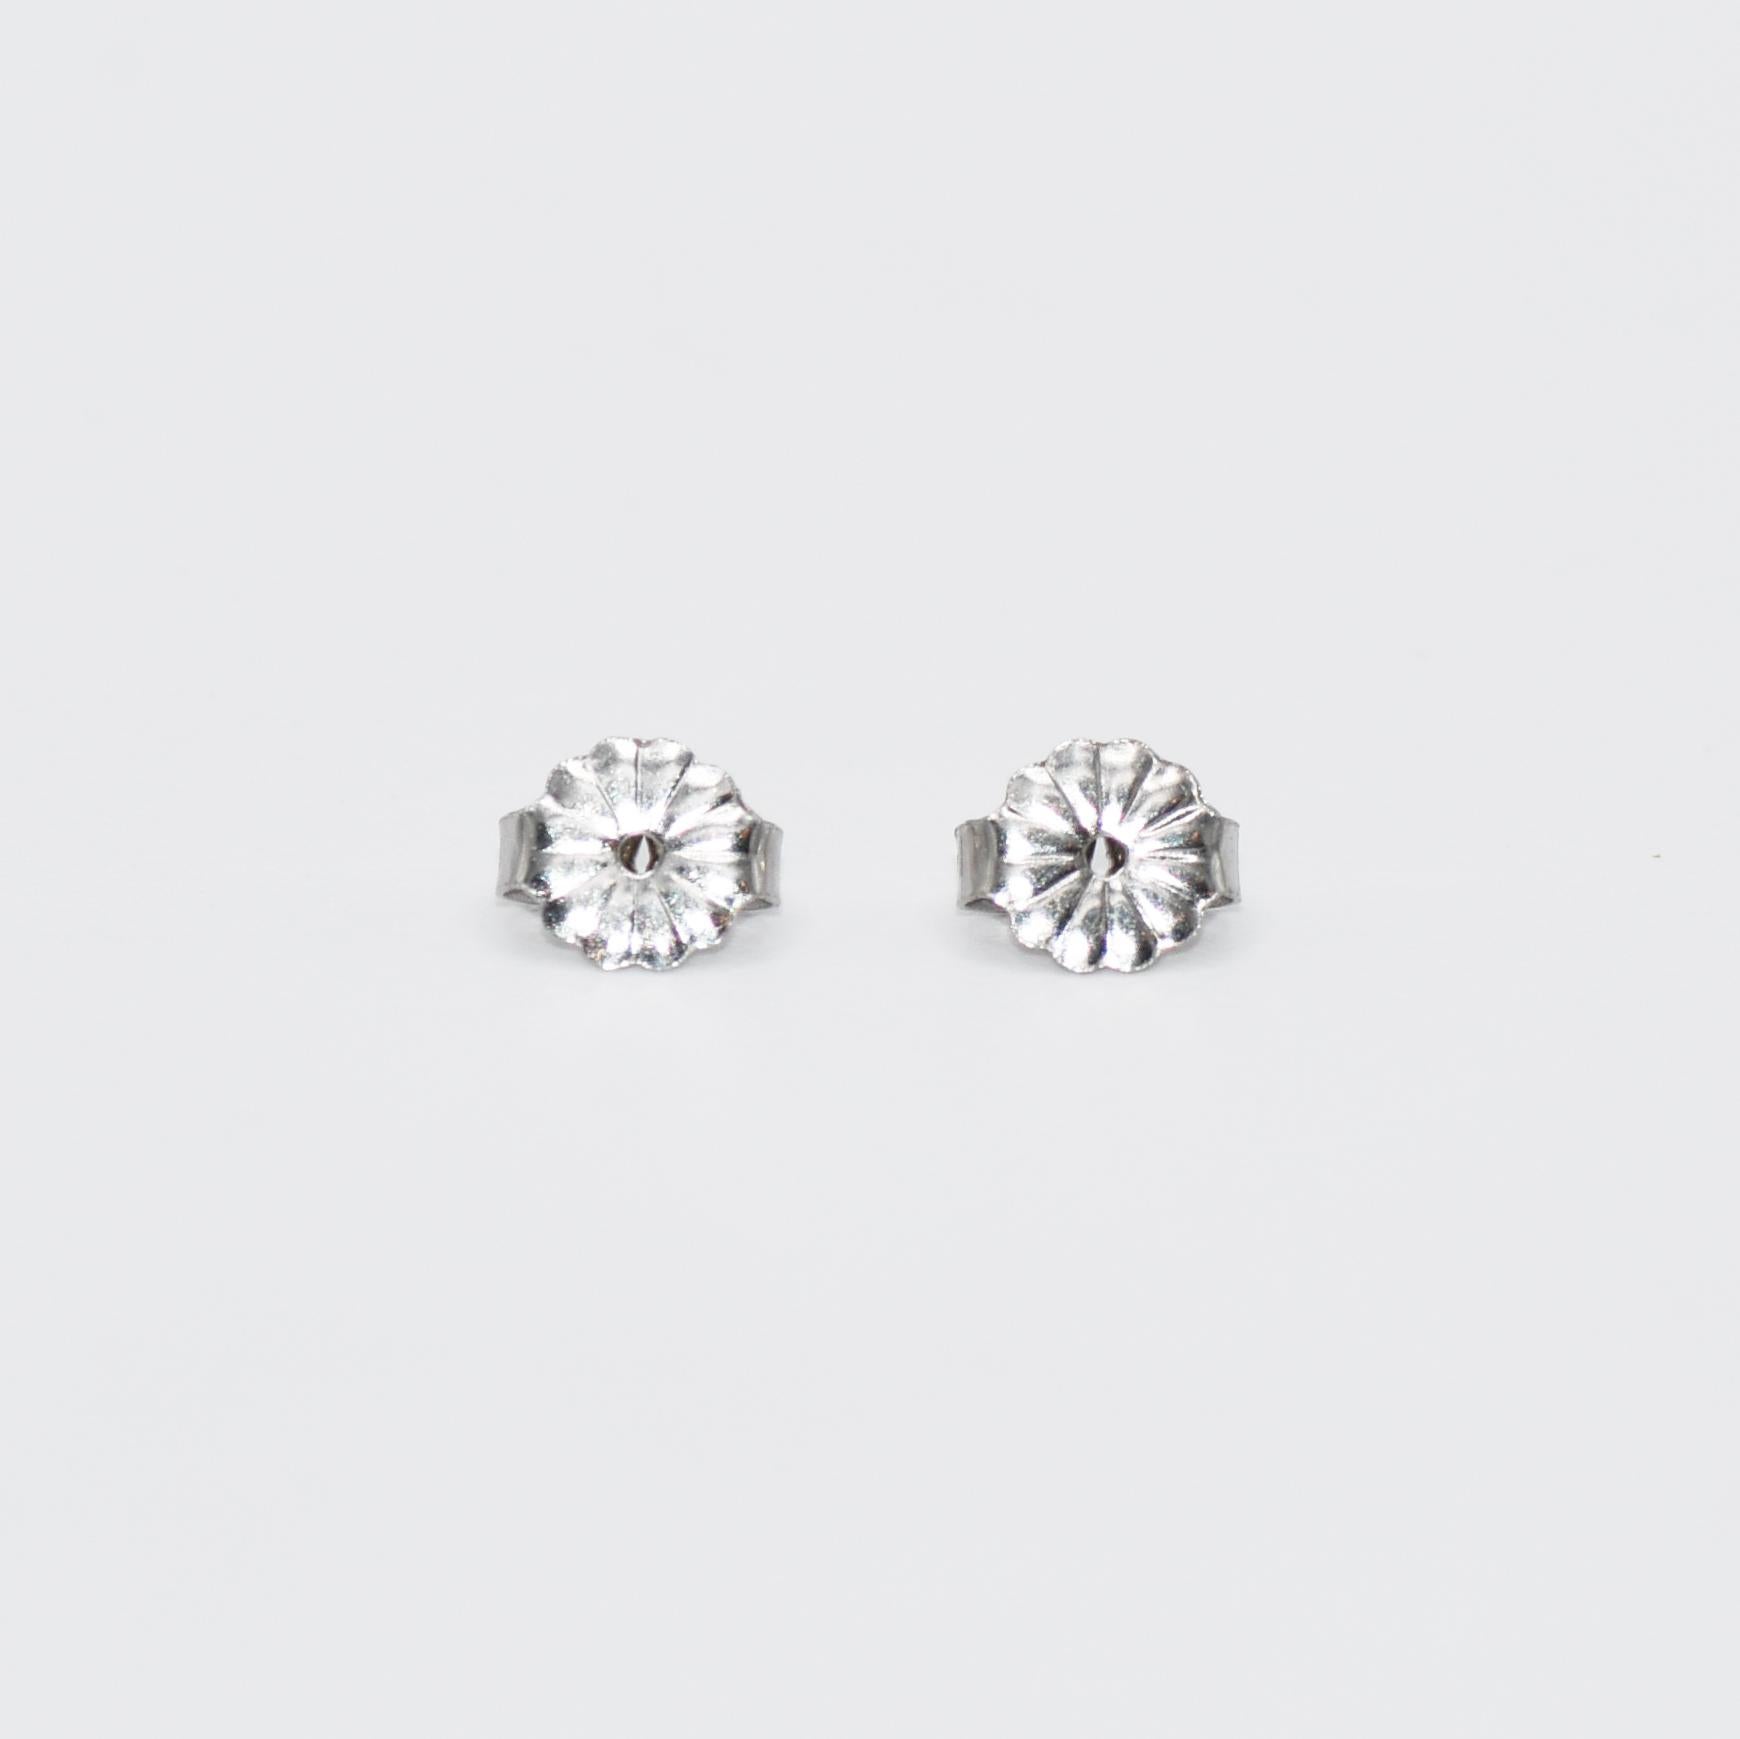 14K White Gold Diamond Studs, .90tdw, 1g
Diamond stud earrings in 14k white gold mountings.
The mountings are new and stamped 14k.
The diamonds are round brilliant cuts, .90 total carats, H to i color, Si clarity, good to very good cuts.
Posts with